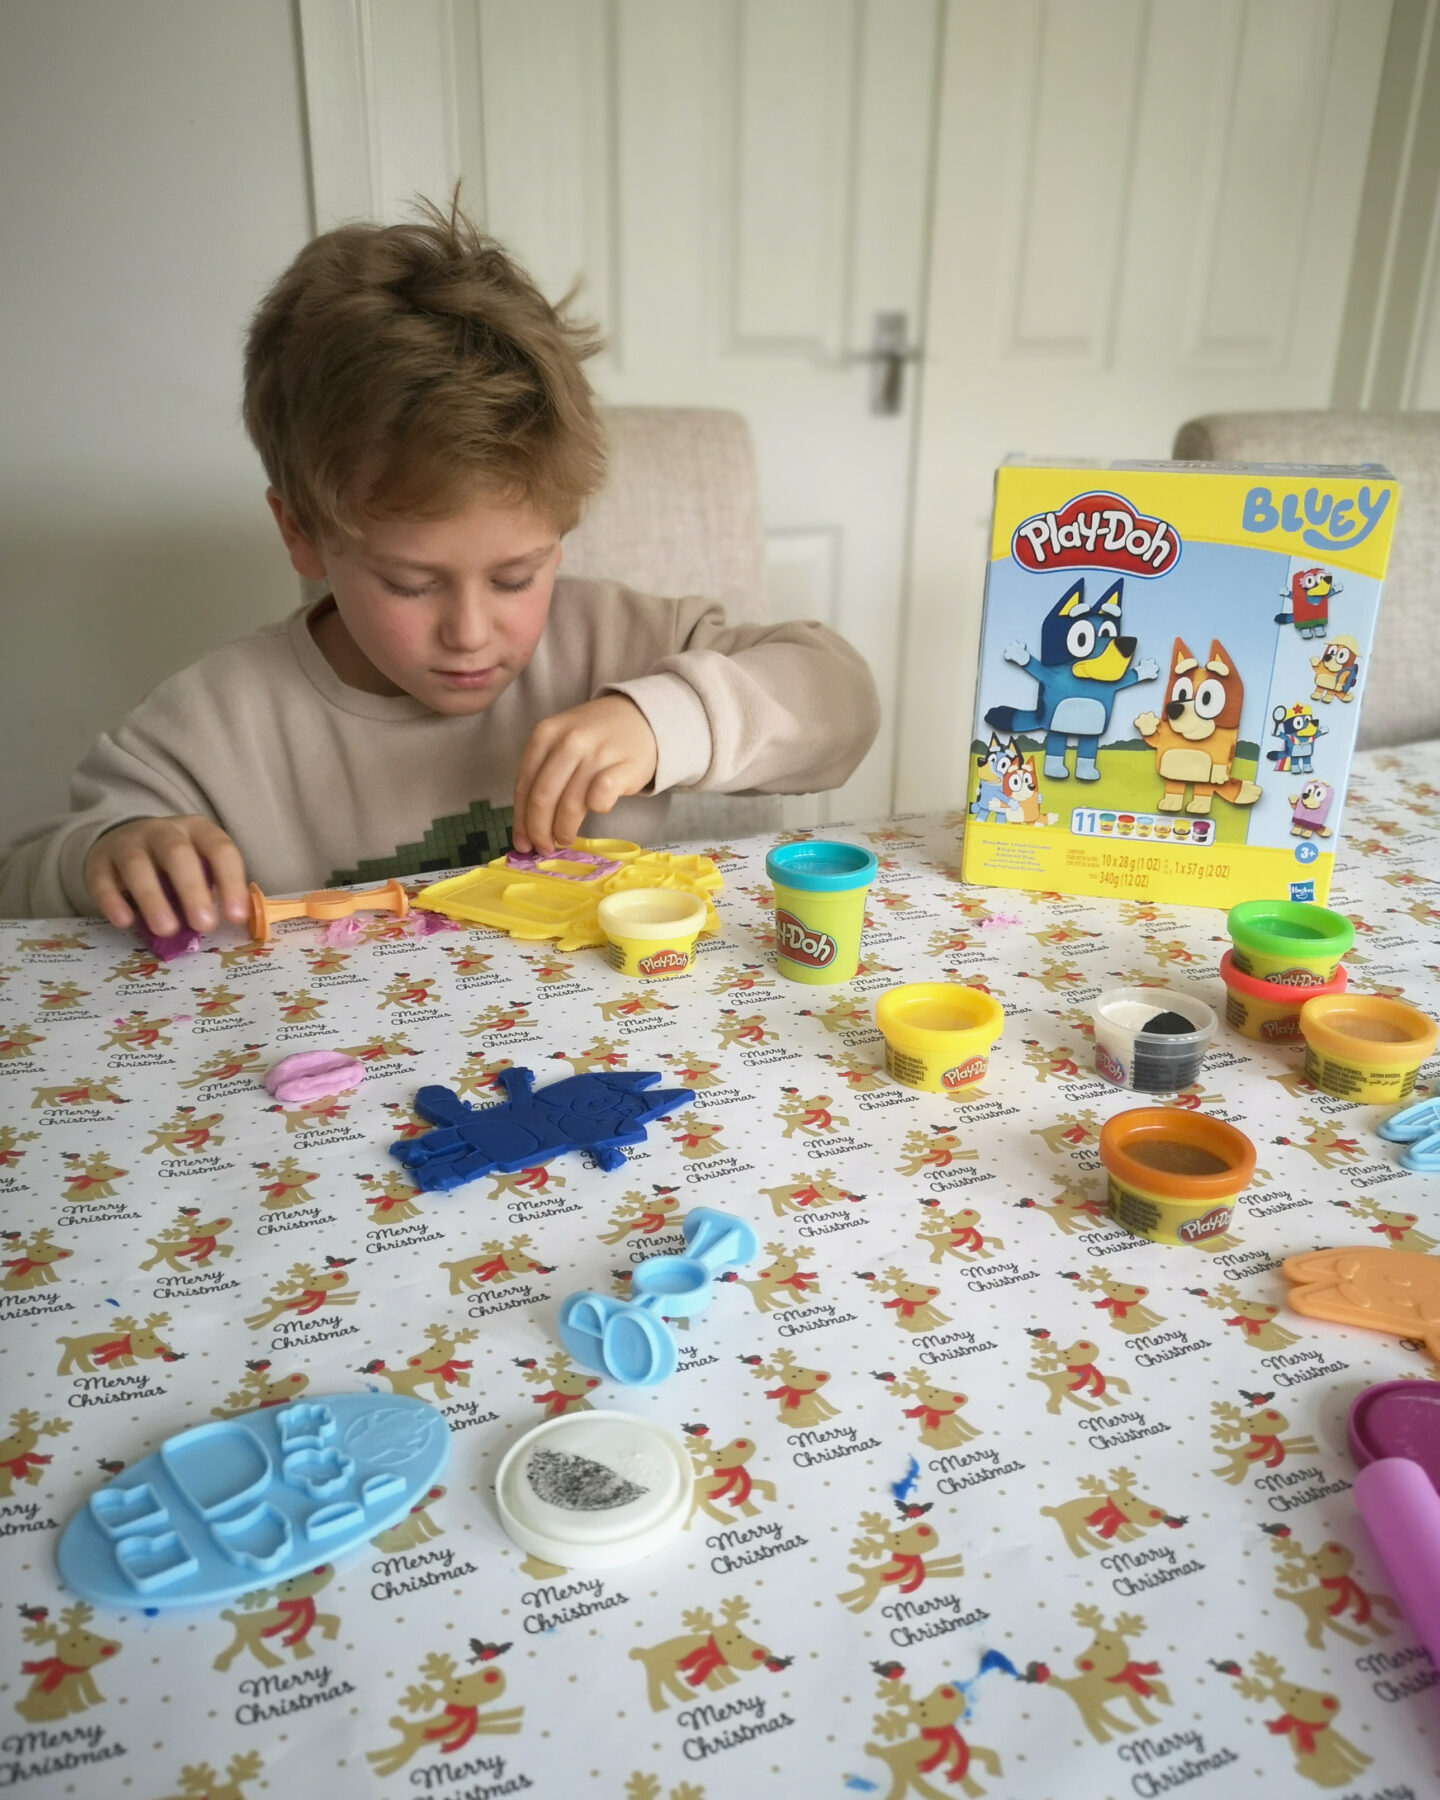 Christmas Ready With Very.co.uk, Very.co.uk, Christmas Shopping, Toys, Christmas Toys, Hot Wheels, Play-Doh, Fire Tablet, Christmas Wish List, Tonies, Kids Toys, Toys Reviews, The Frenchie Mummy